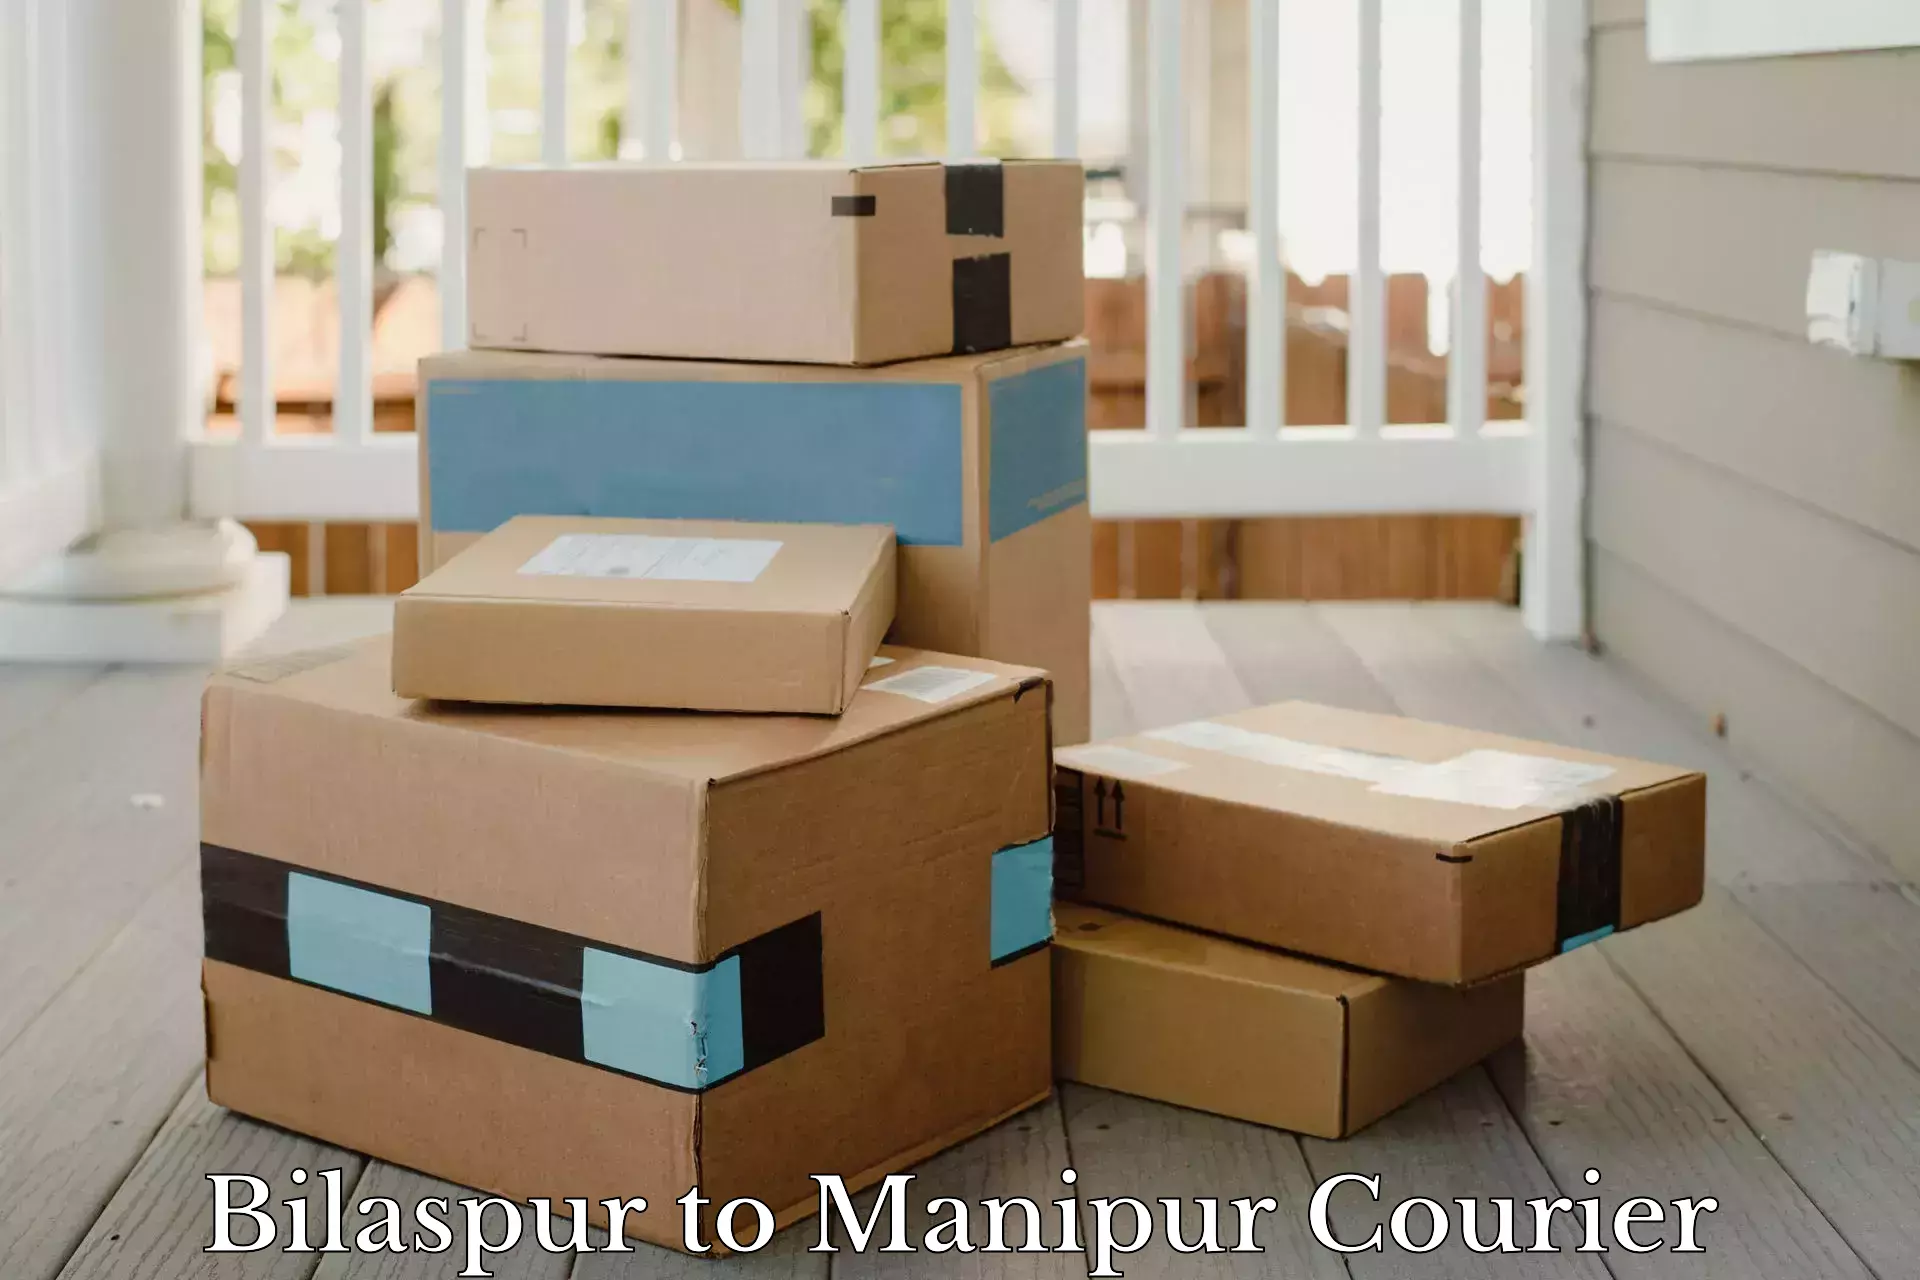 Courier service innovation Bilaspur to Imphal